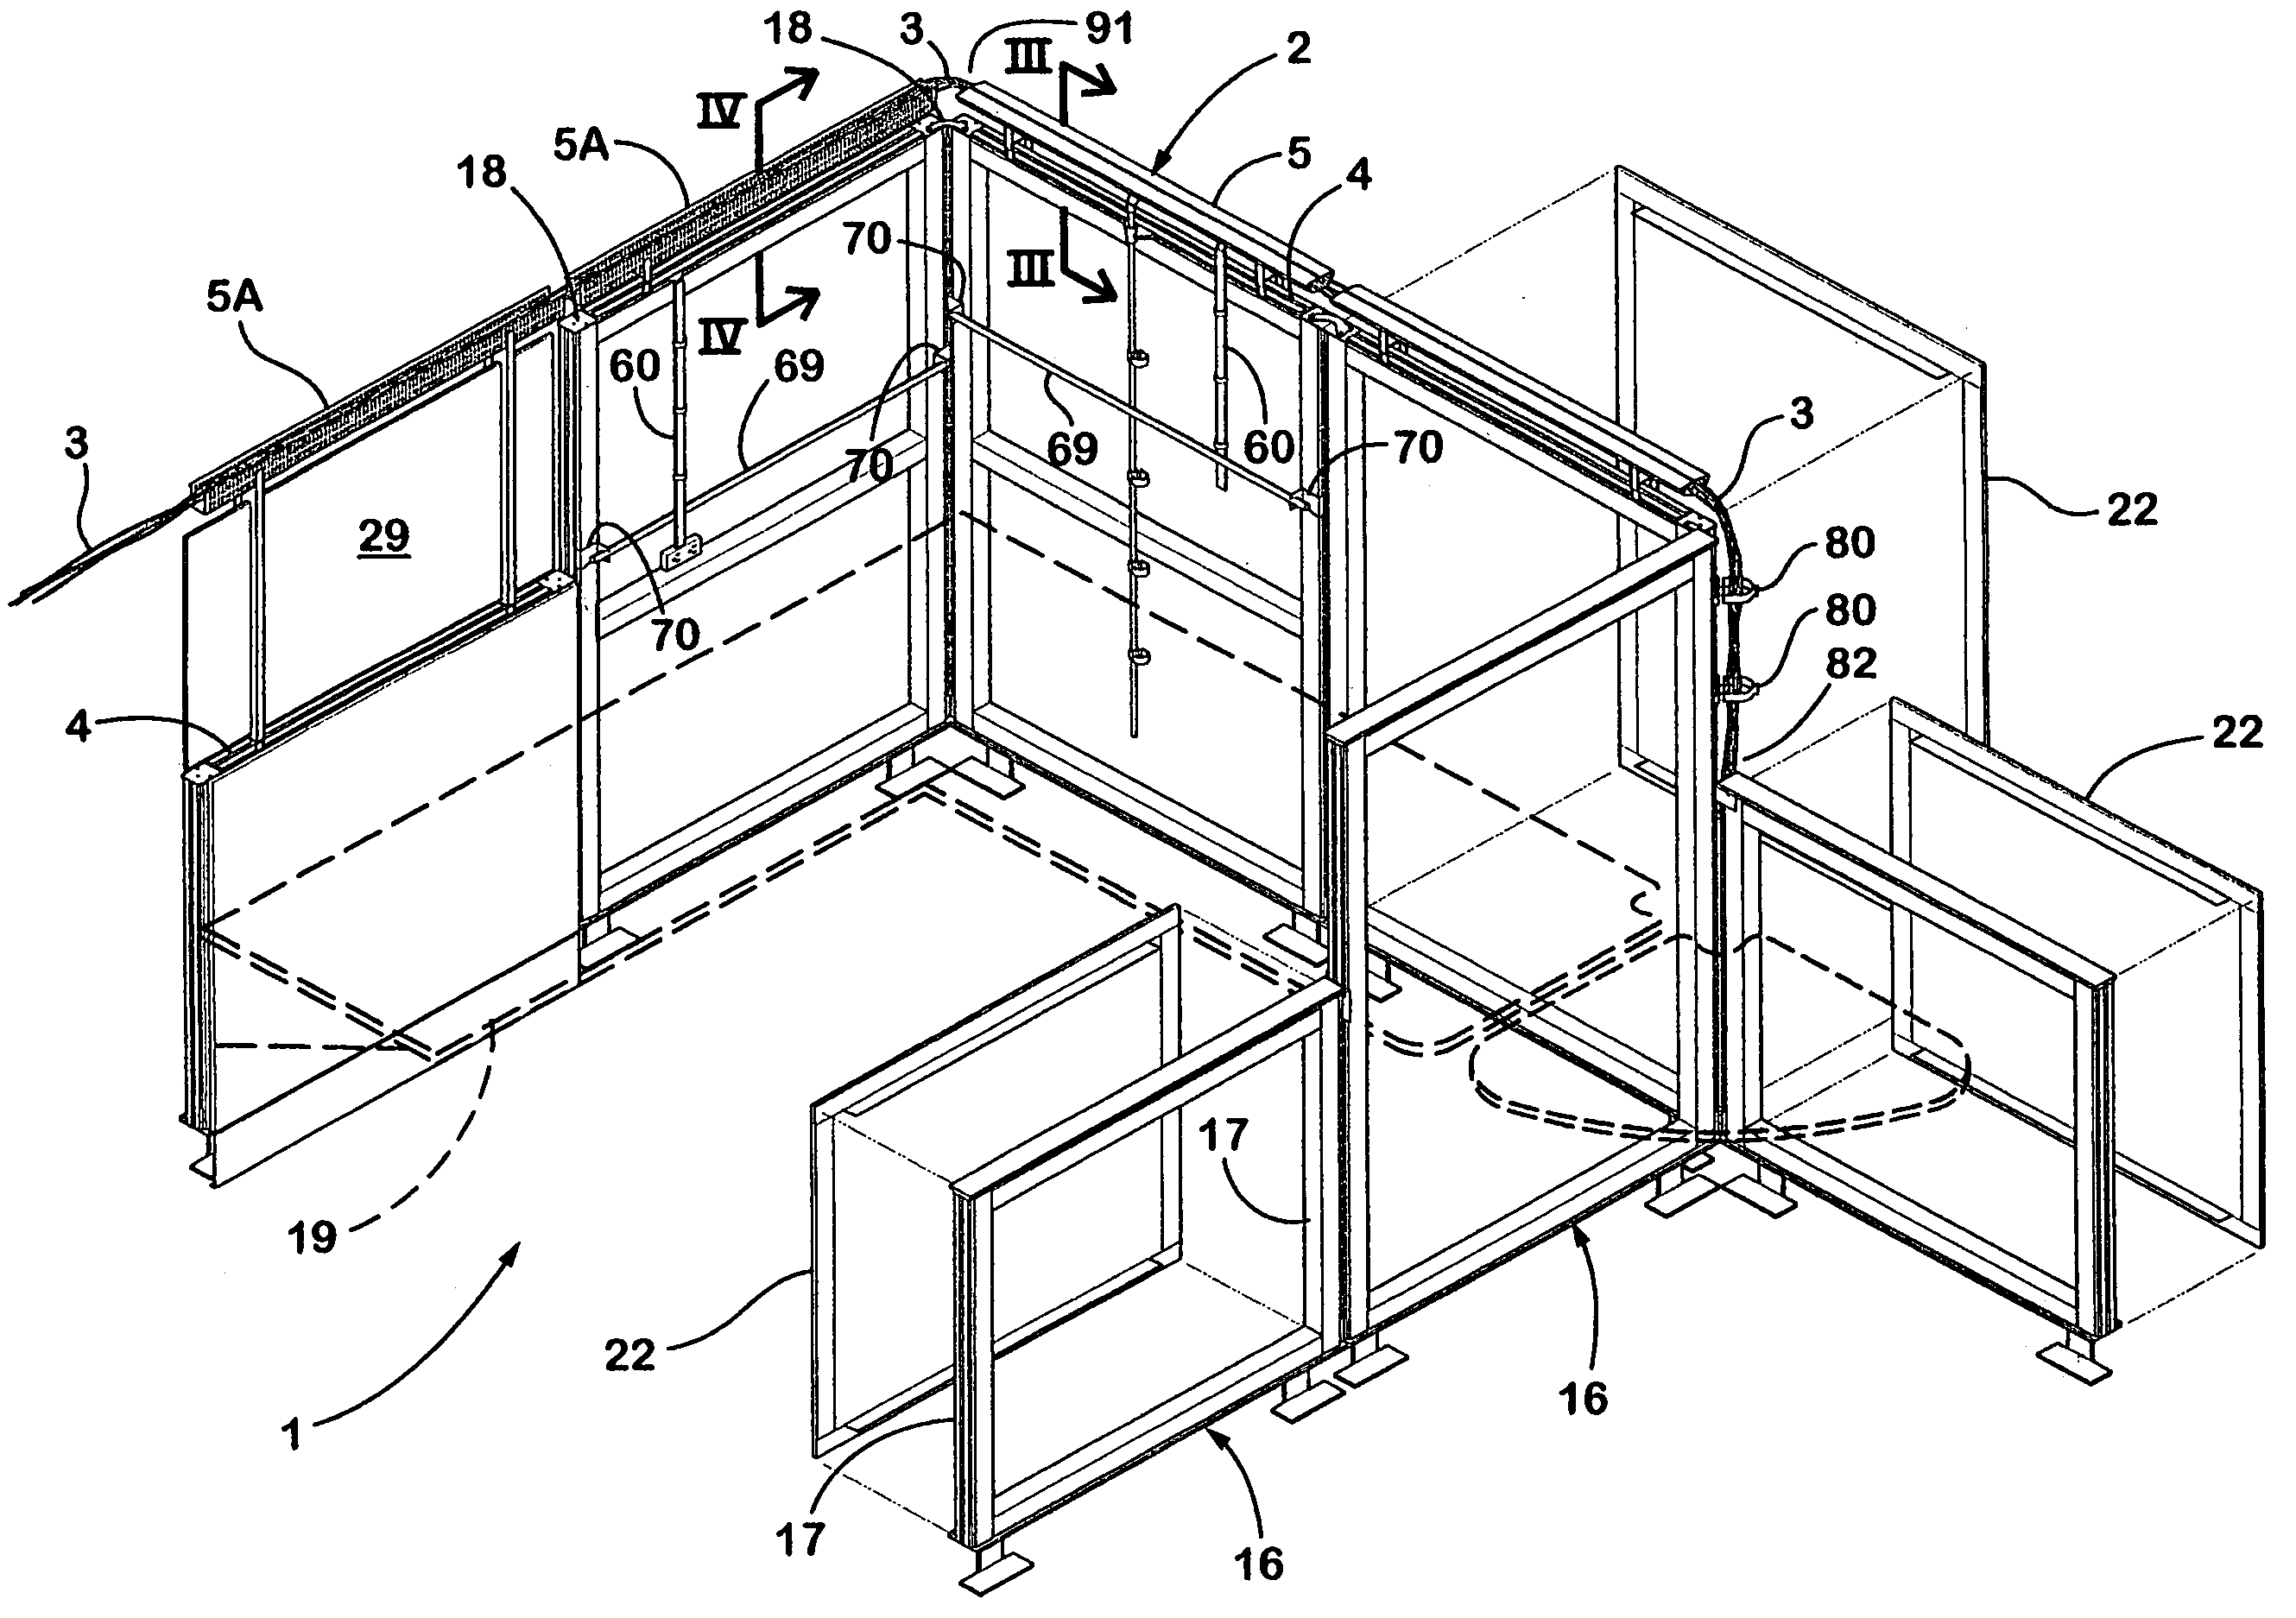 Partition system with elevated raceway